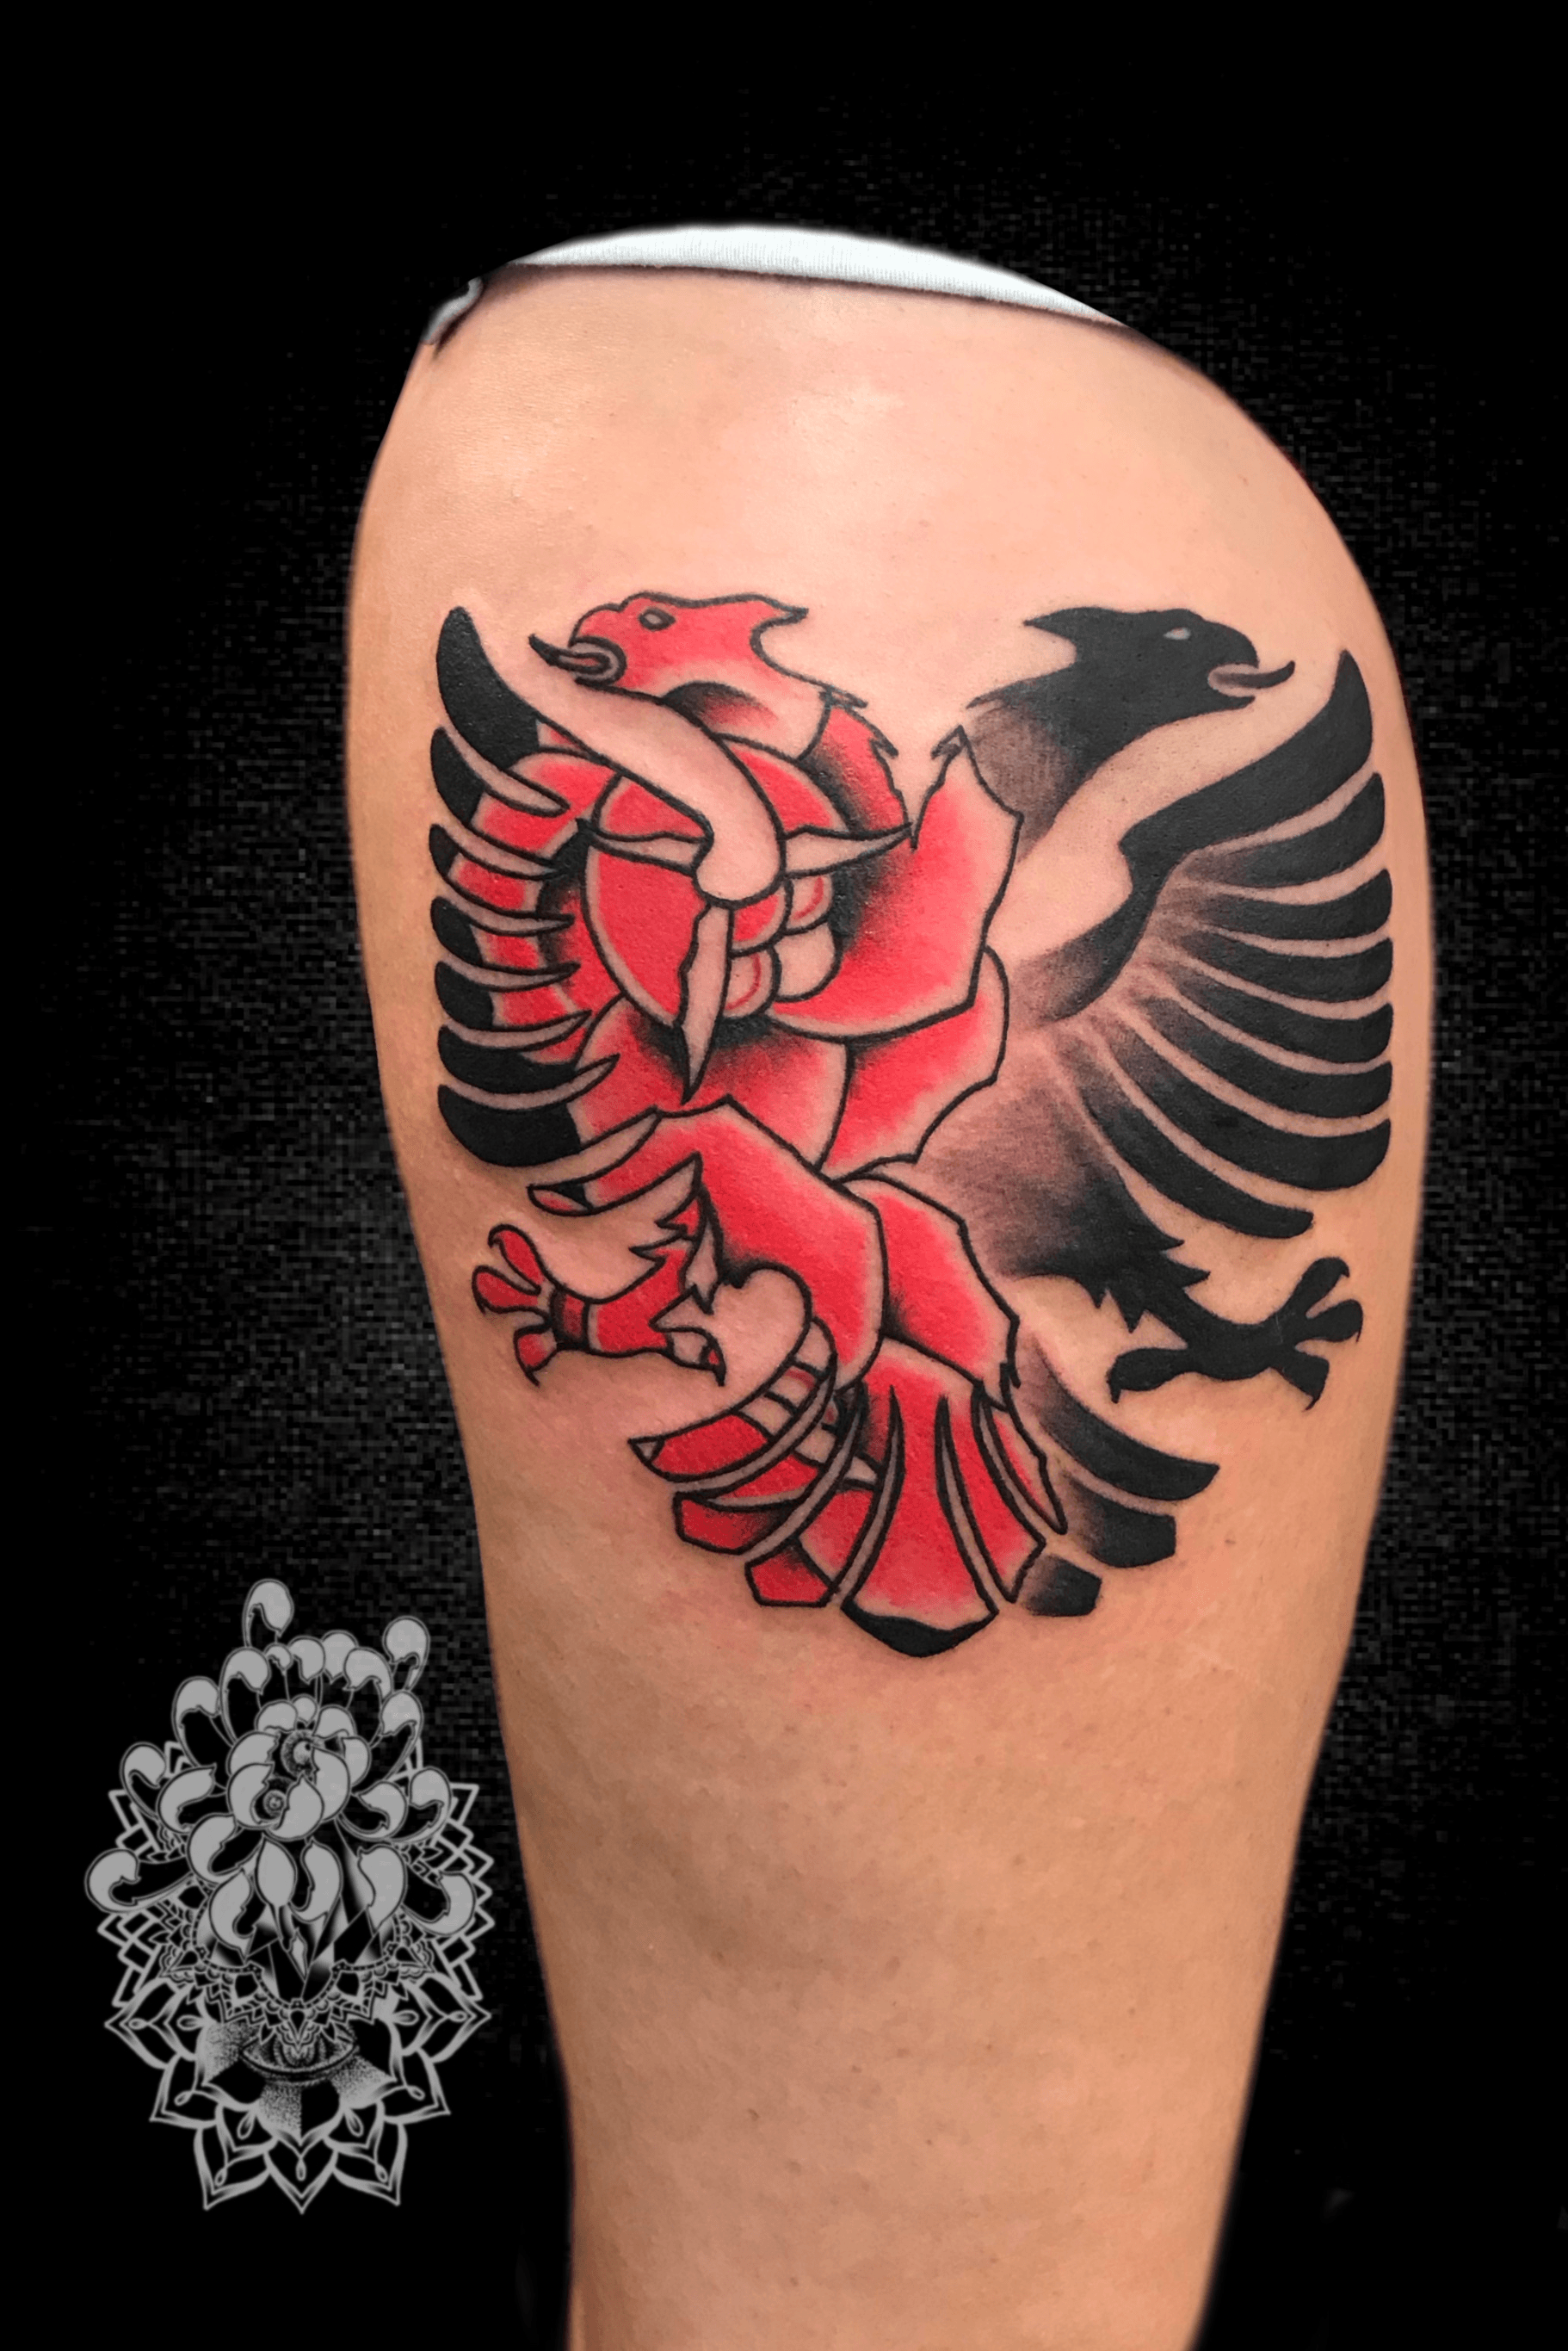 The eagle girl  Your Tattoo